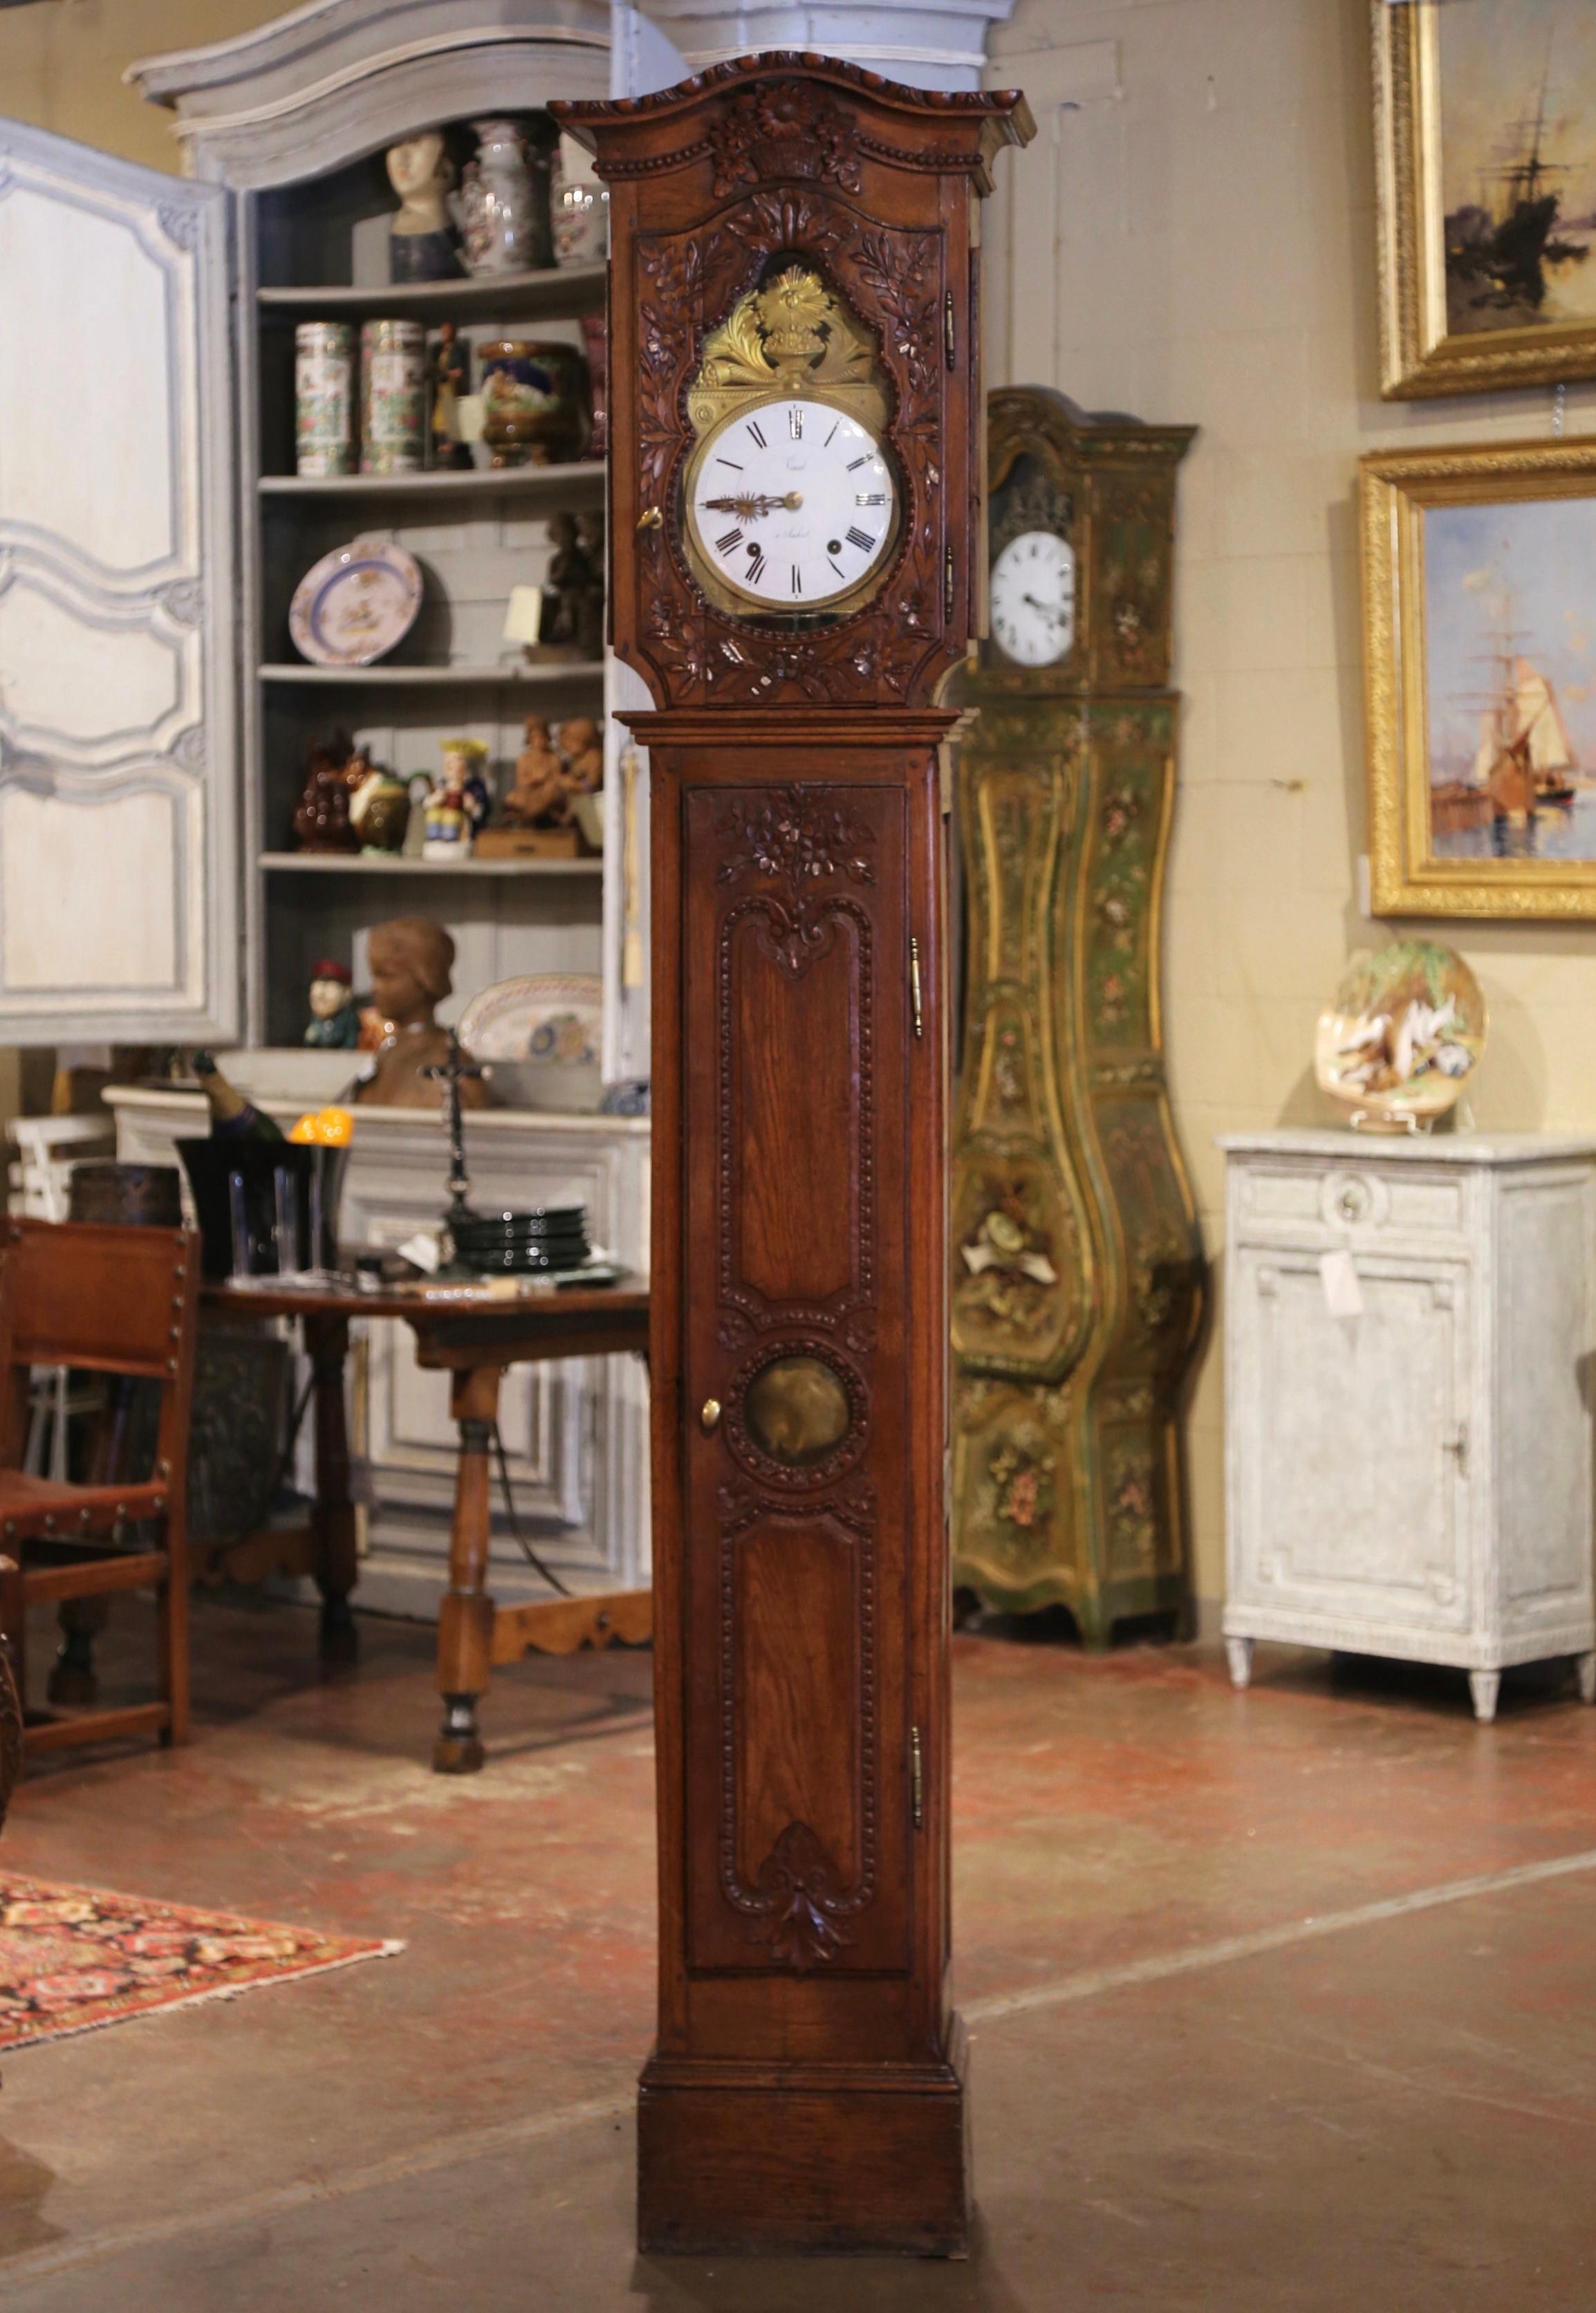 This elegant, antique long case clock was crafted in Normandy, France, circa 1780. The tall grandfather clock stands on a straight bottom plinth; it features a curved bonnet top over a carved flower basket and a highly carved glass door. The case